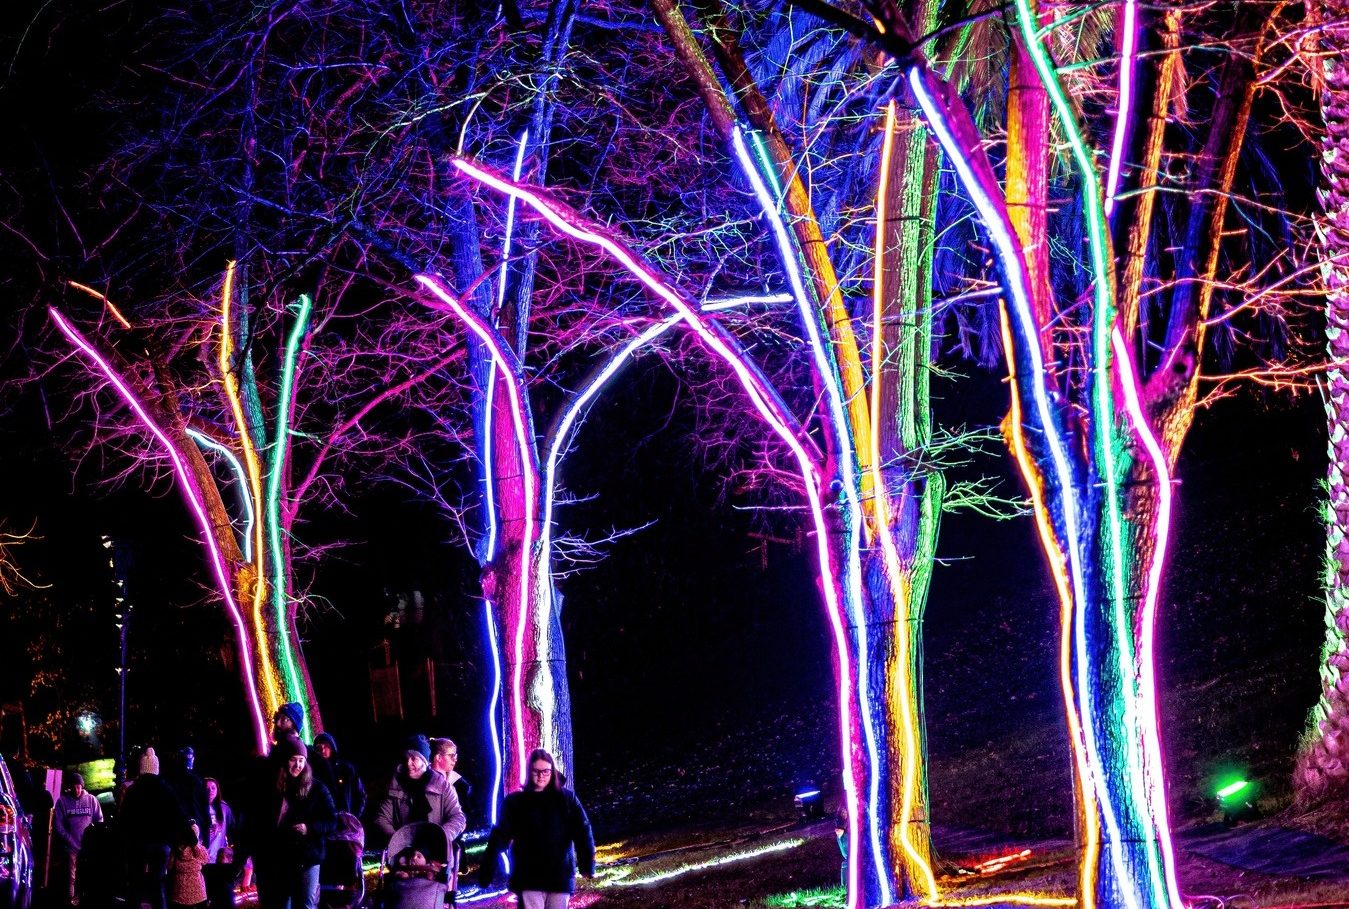 Regional Victoria just scored another magical winter lights festival